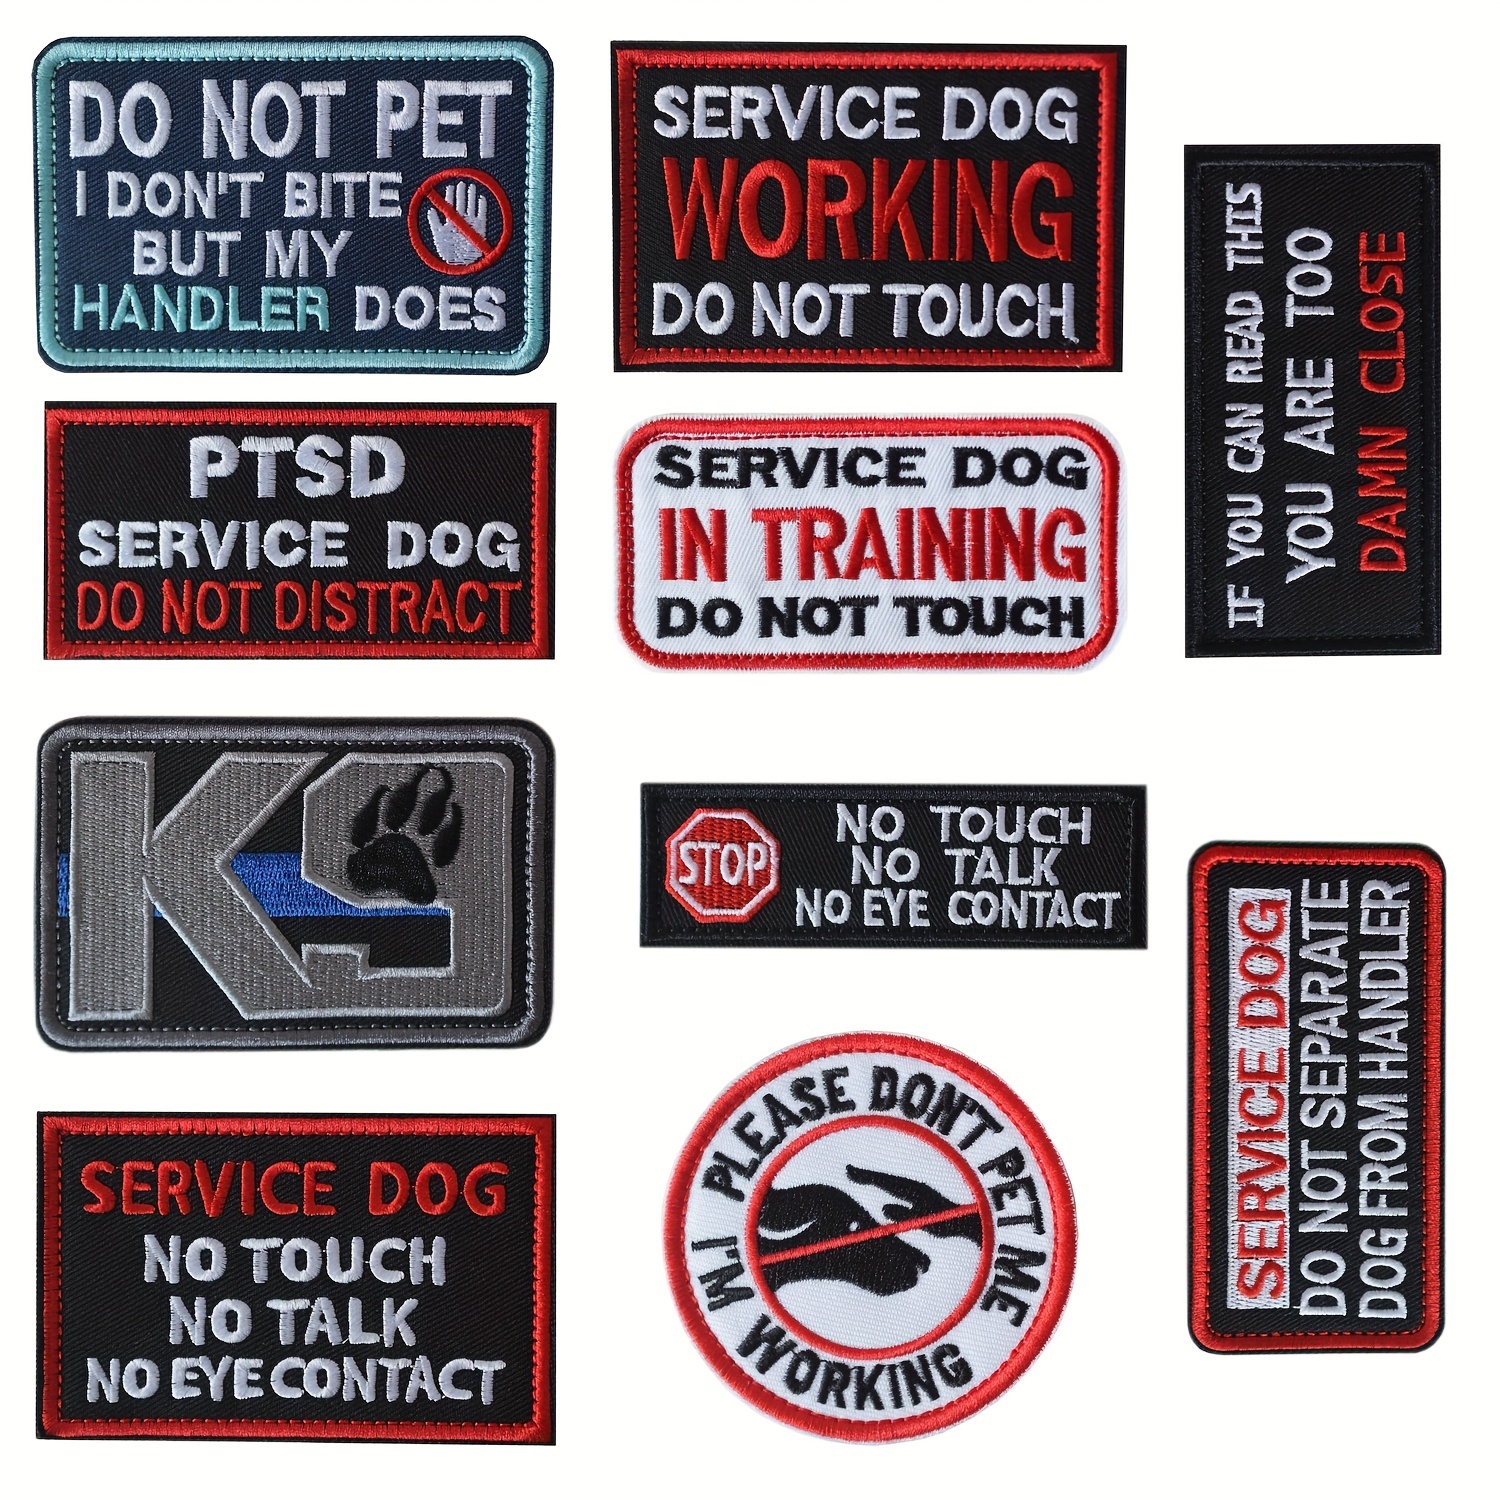  3pcs Random Pack Tactical Morale Patches with Hook and